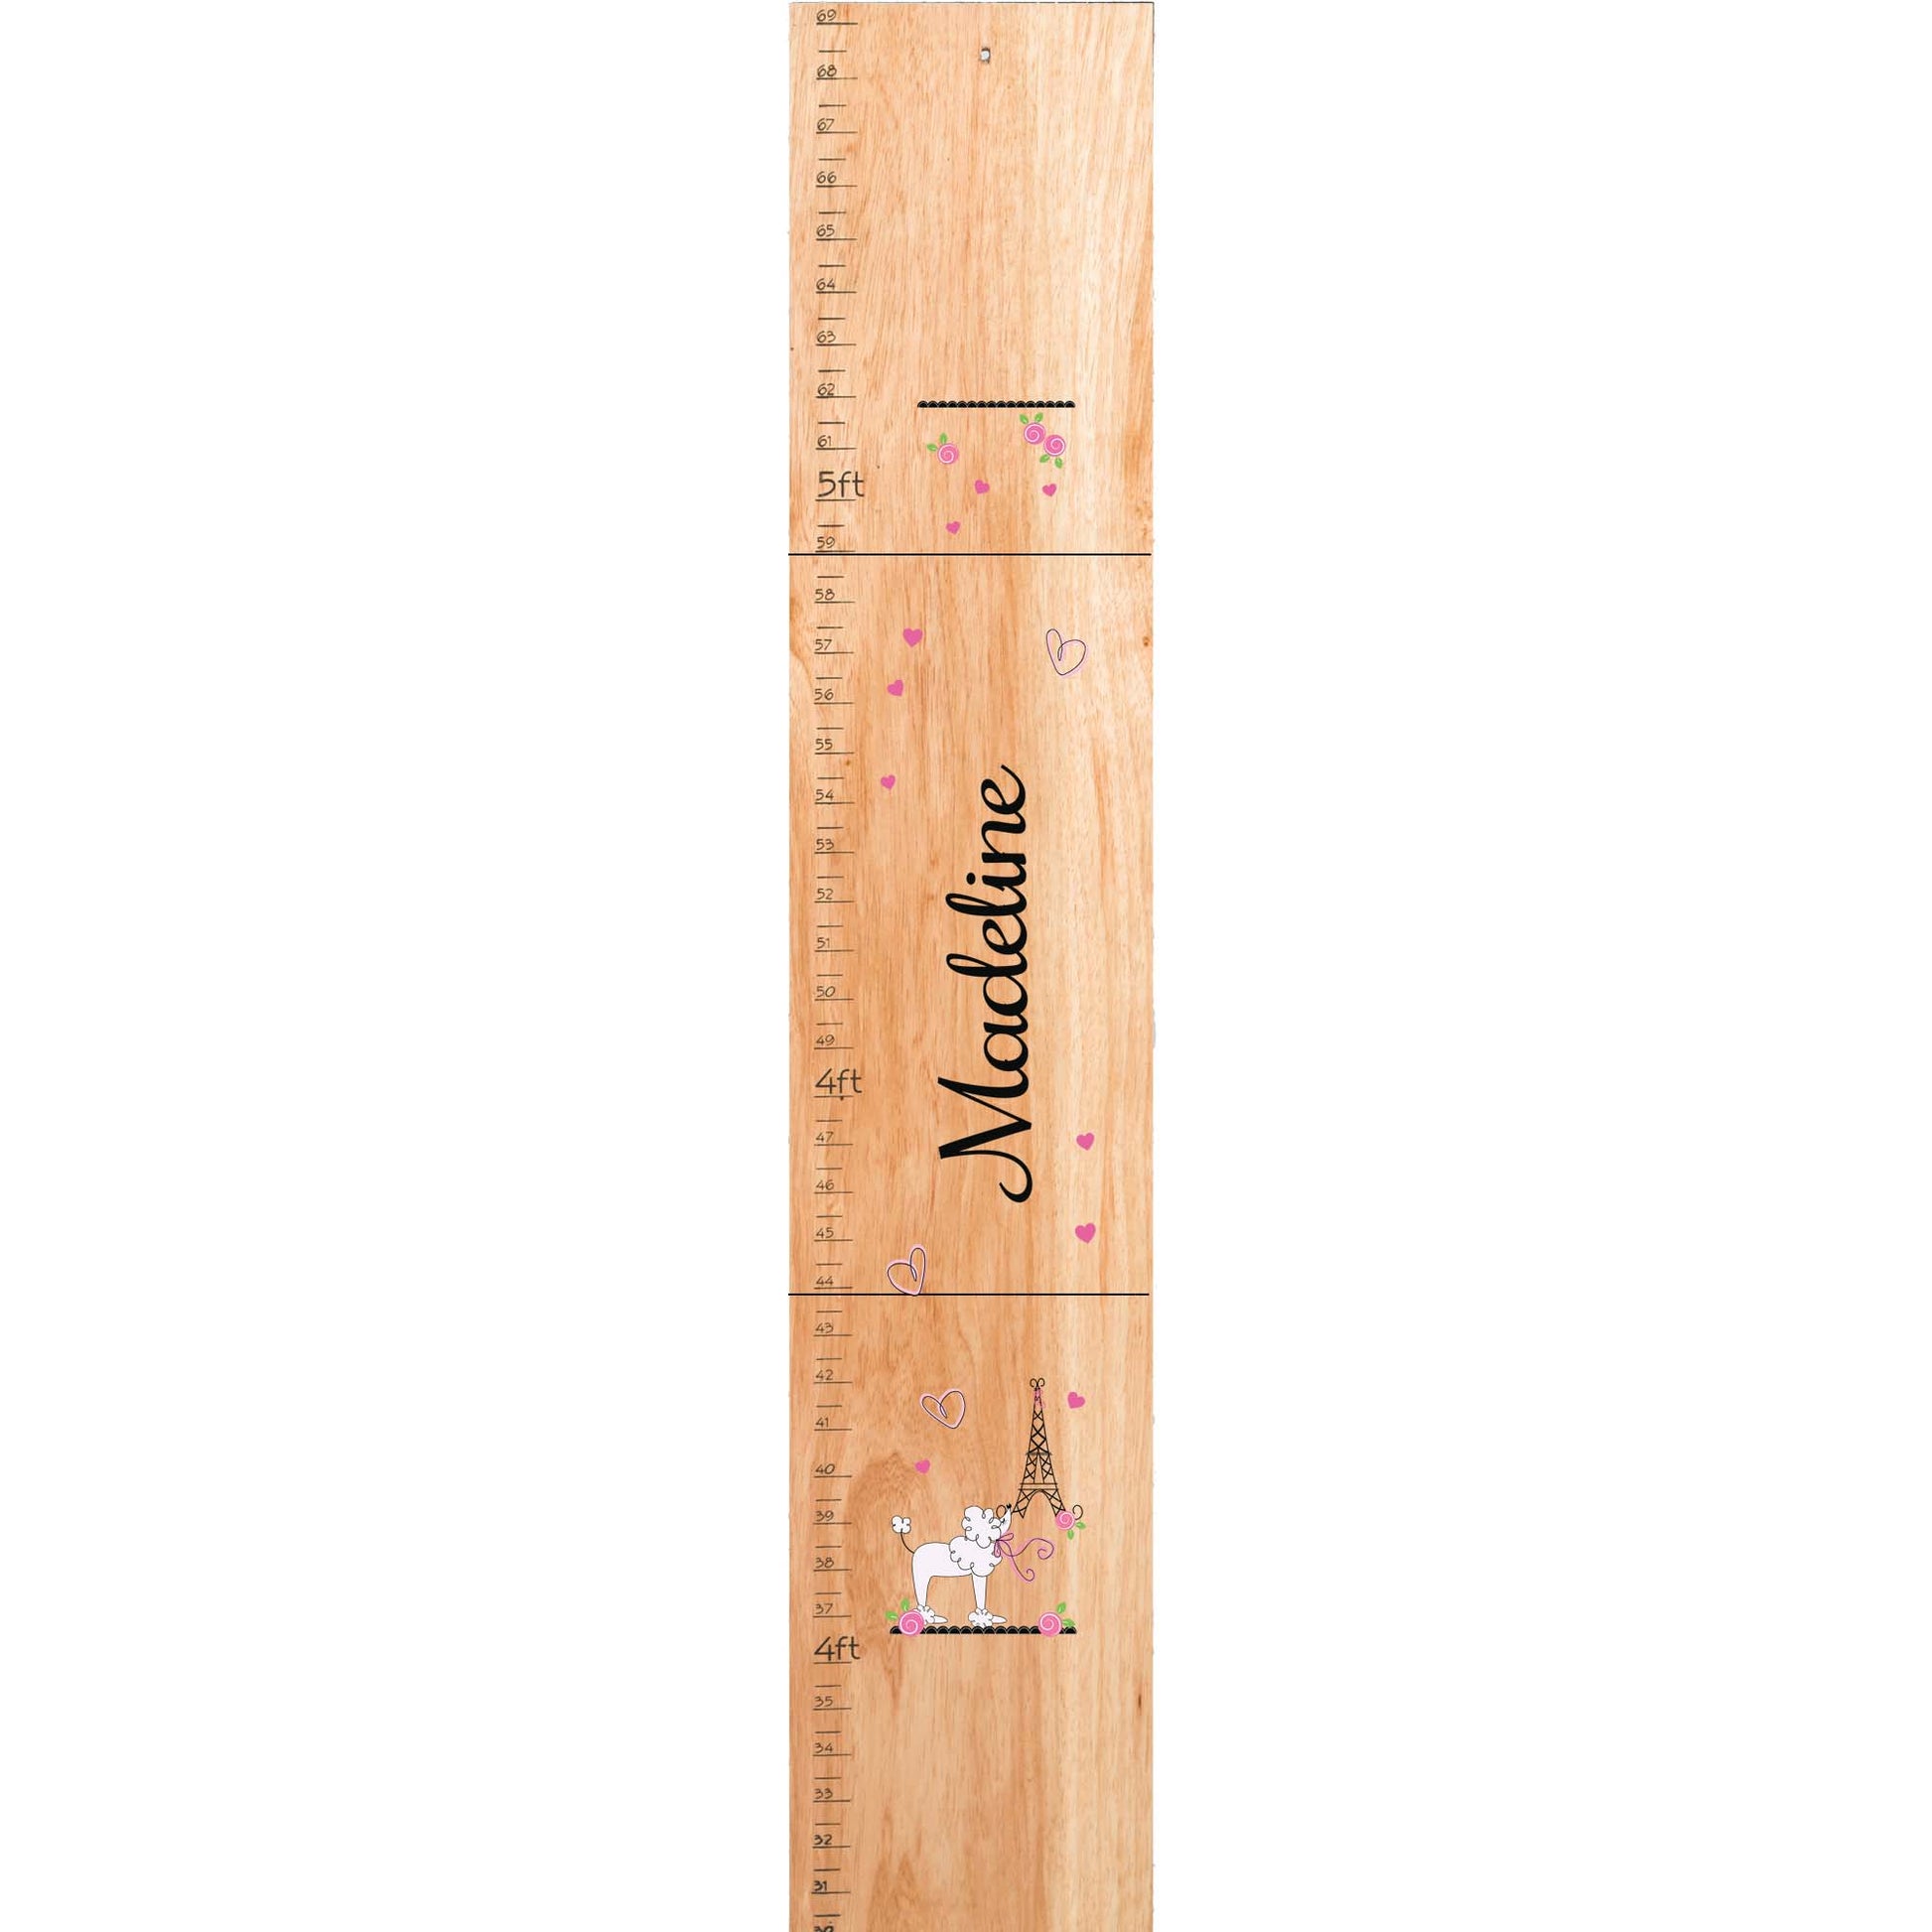 Personalized Natural Growth Chart With Unicorn Design